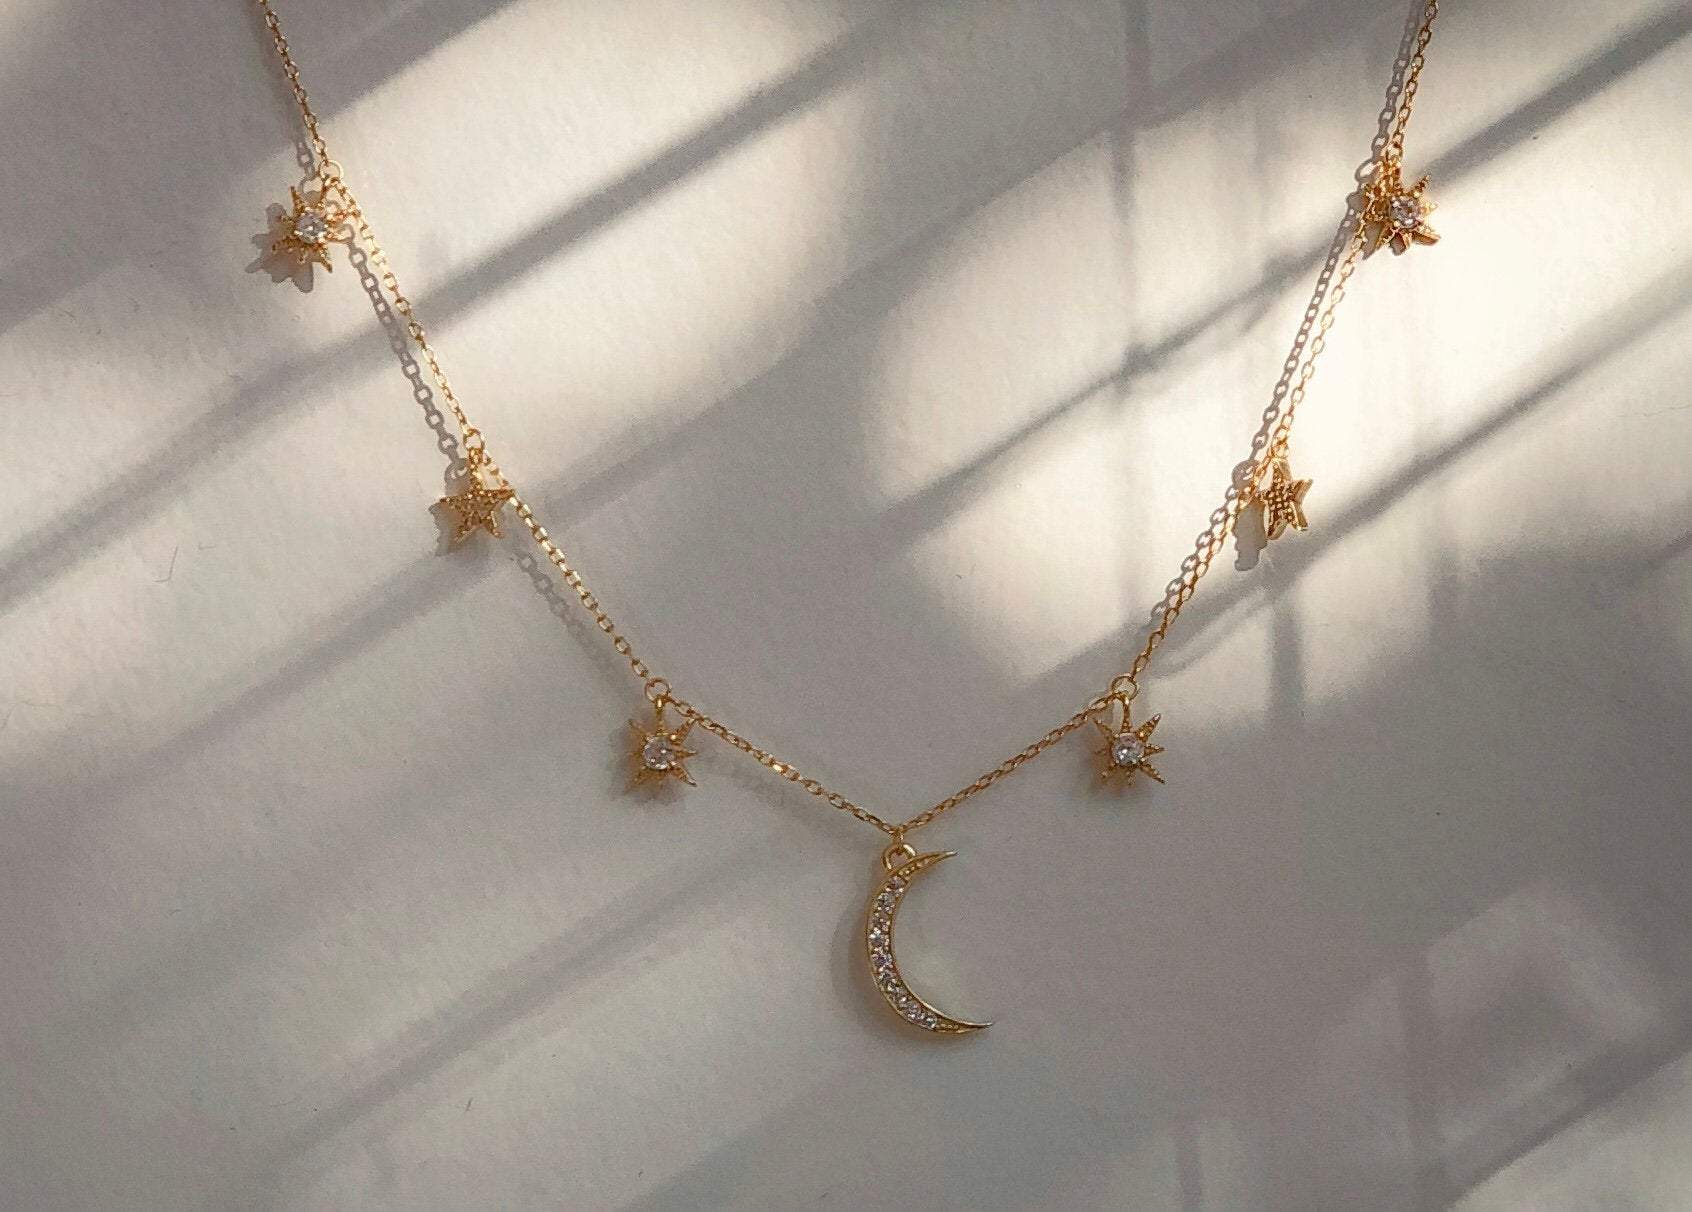 Sterling Silver gold moon and star necklace / gold moon choker / gold star choker / moon and star choker / moon necklace / celestial jewelry LATUKI 